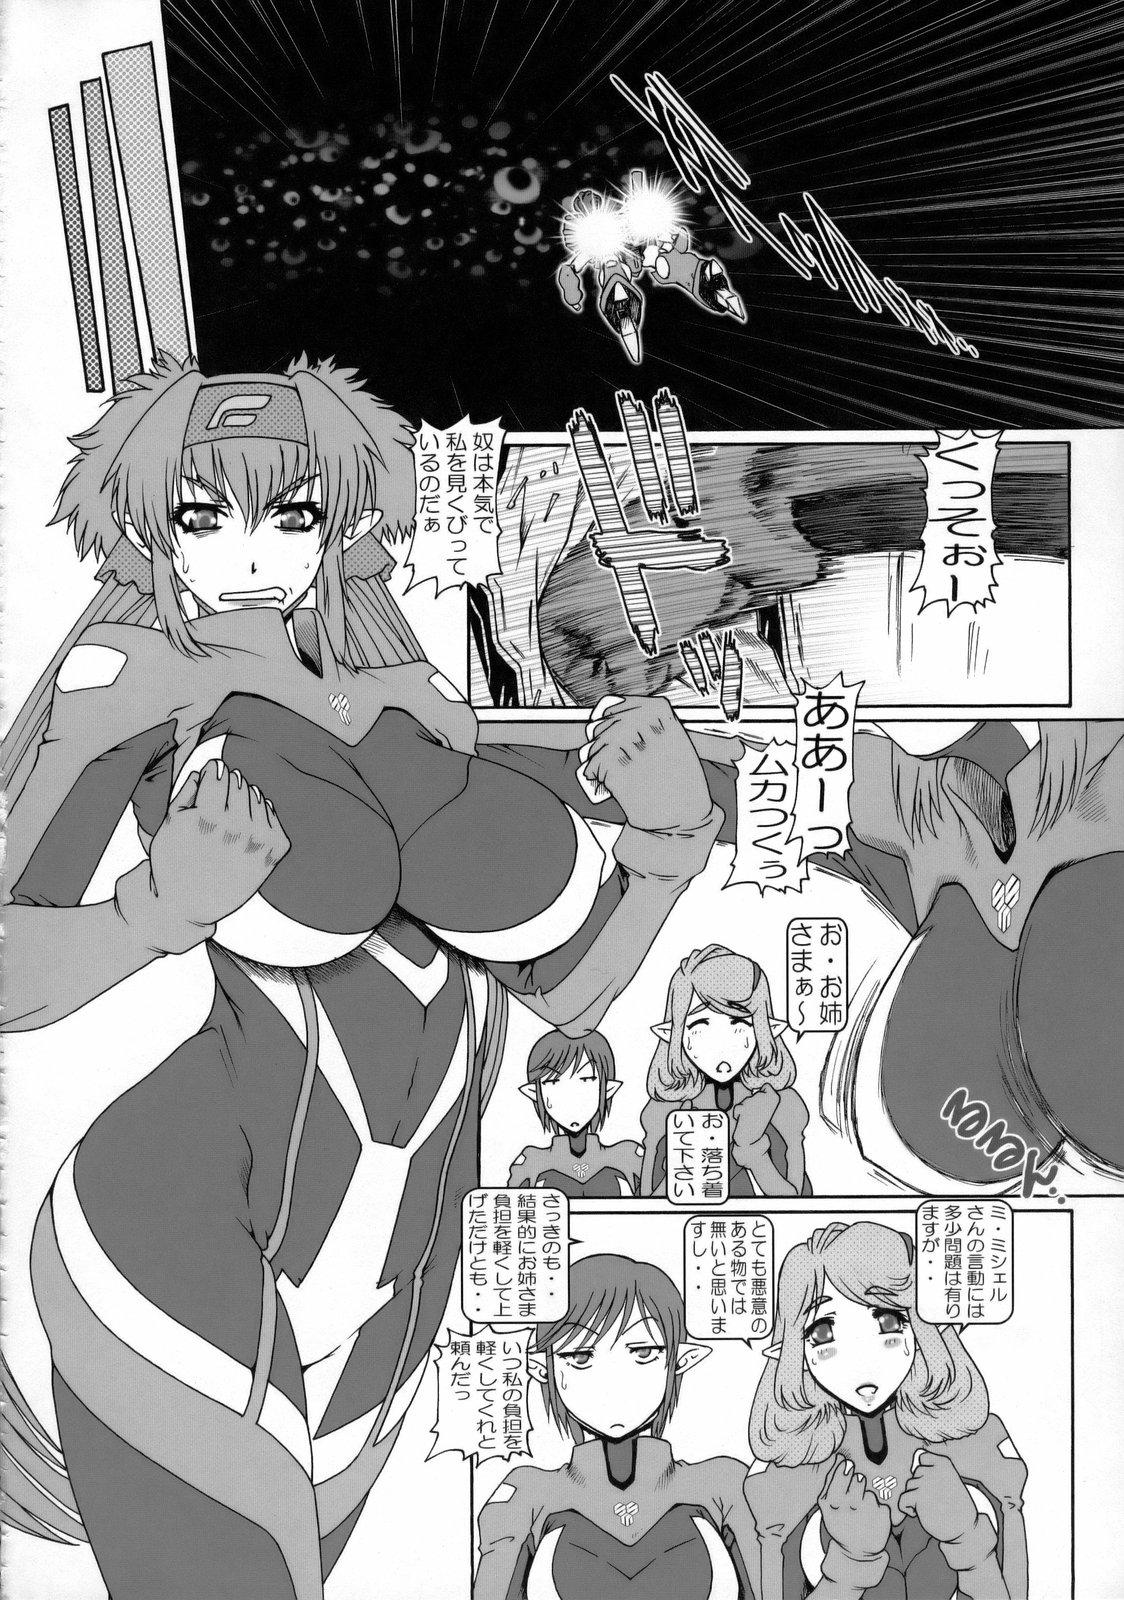 Art PUCHI EMPIRE 2008 SUMMER - Macross frontier Cosplay - Page 7